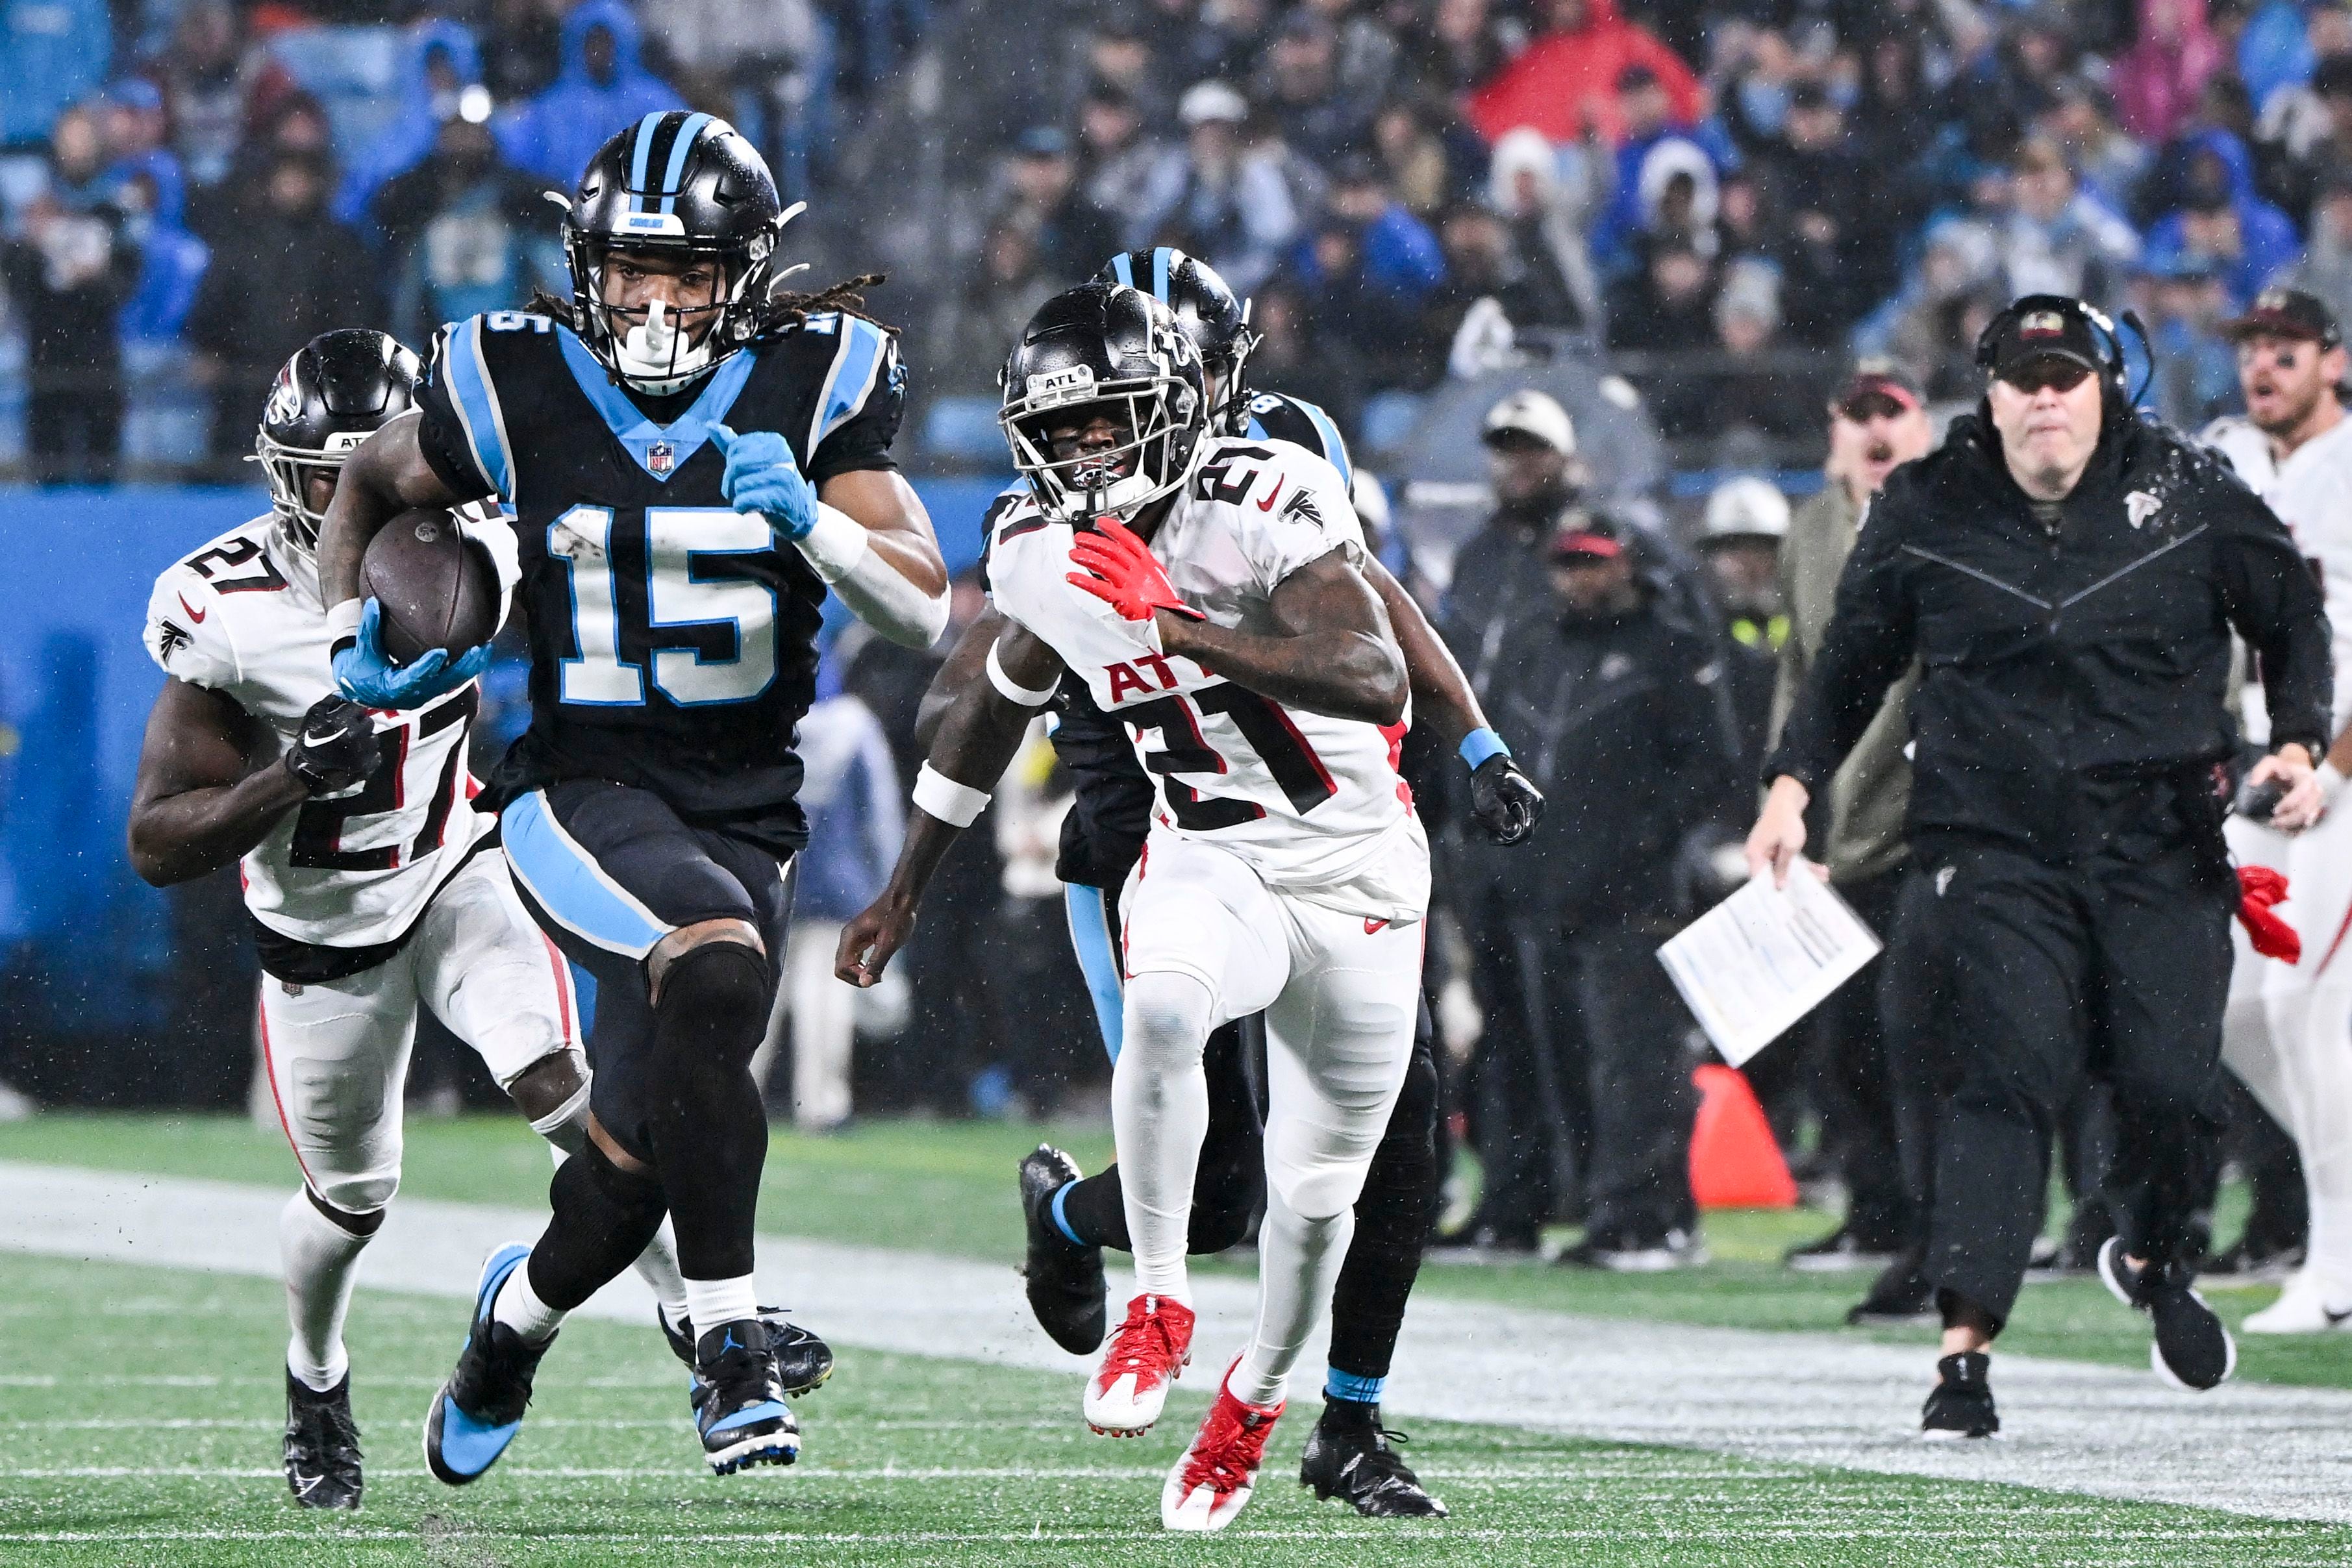 Falcons-Panthers back at it less than 2 weeks after OT game